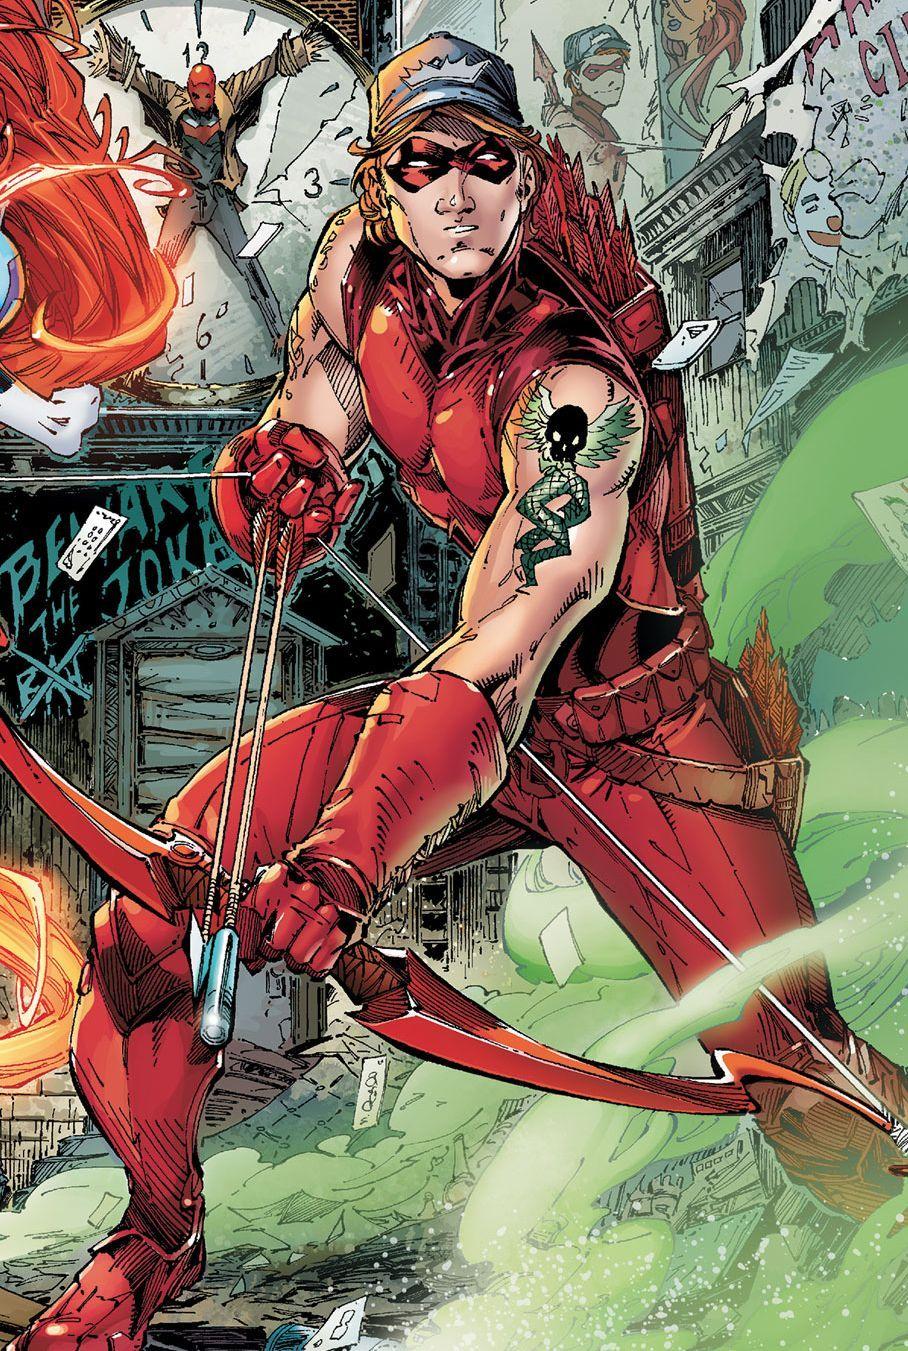 Roy Harper screenshots, image and picture Vine. More